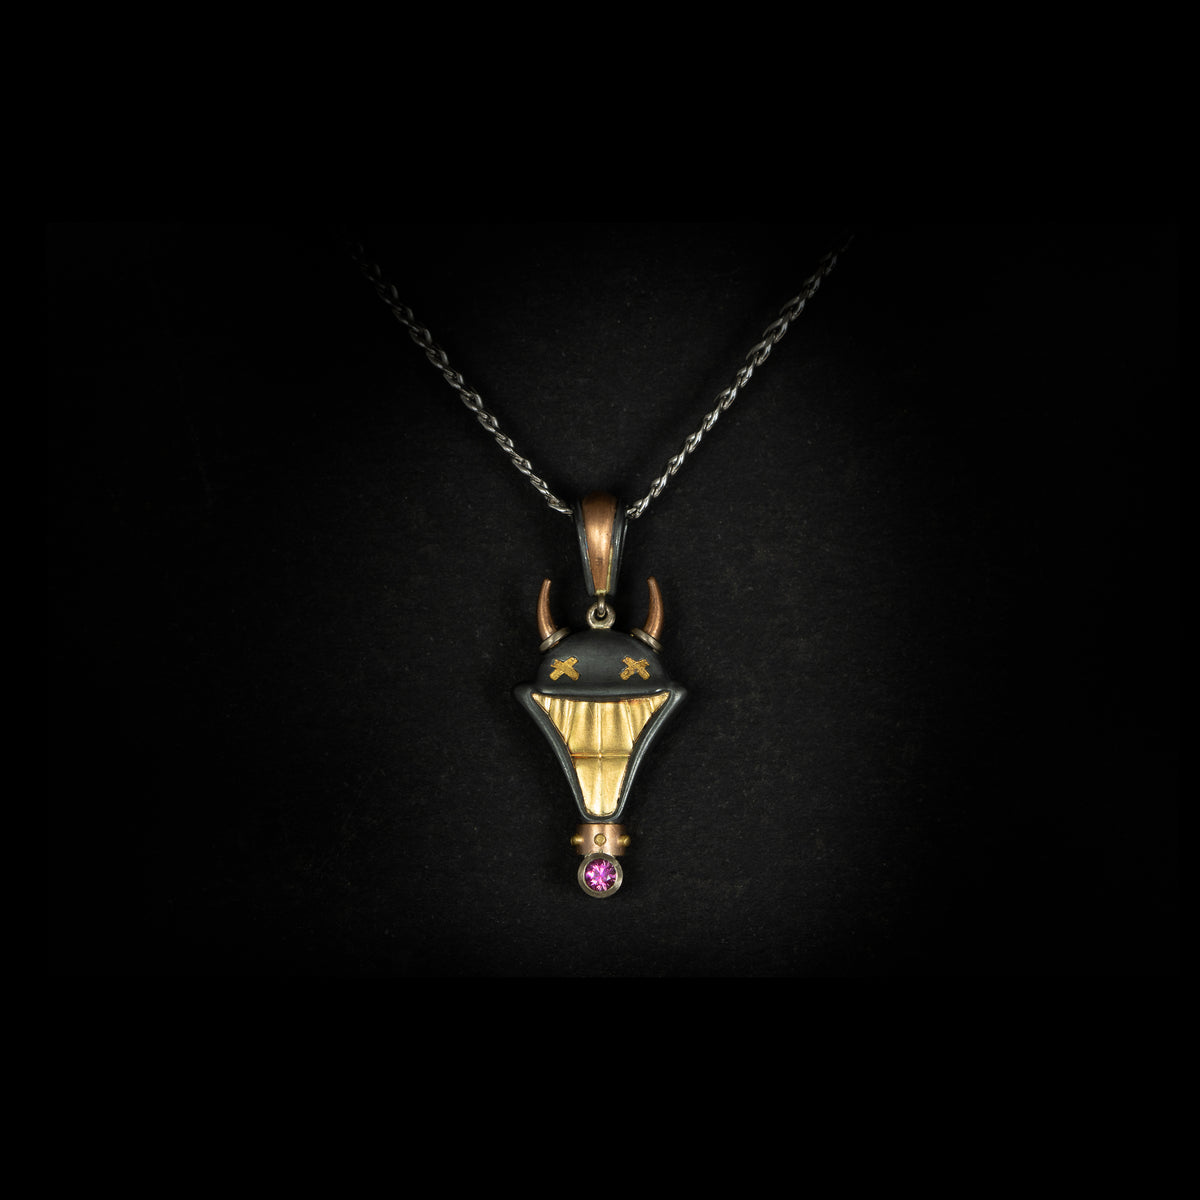 Smile Please hand crafted jewellery pendant. Hand crafted smile motif with horns in oxidised silver, 18ct yellow gold, rose gold, white gold and fine gold set with one round pink sapphire. On chain on black background.